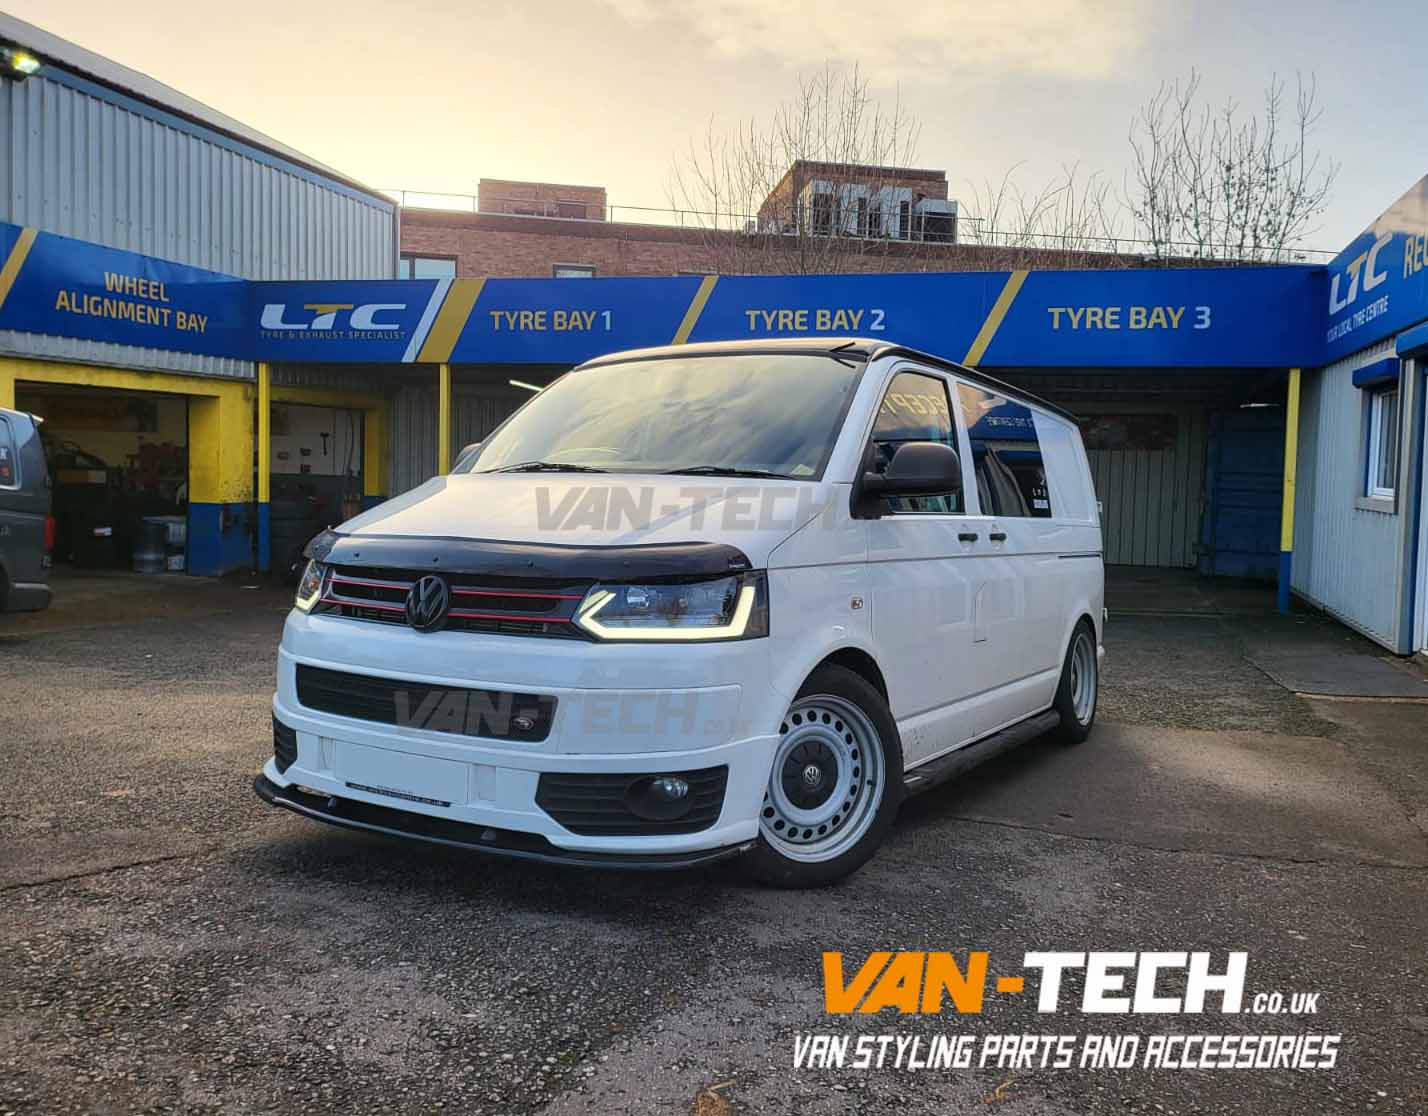 VW T5.1 Transporter Headlights with Dynamic Indicators, Sportline Bumper, Splitter and more